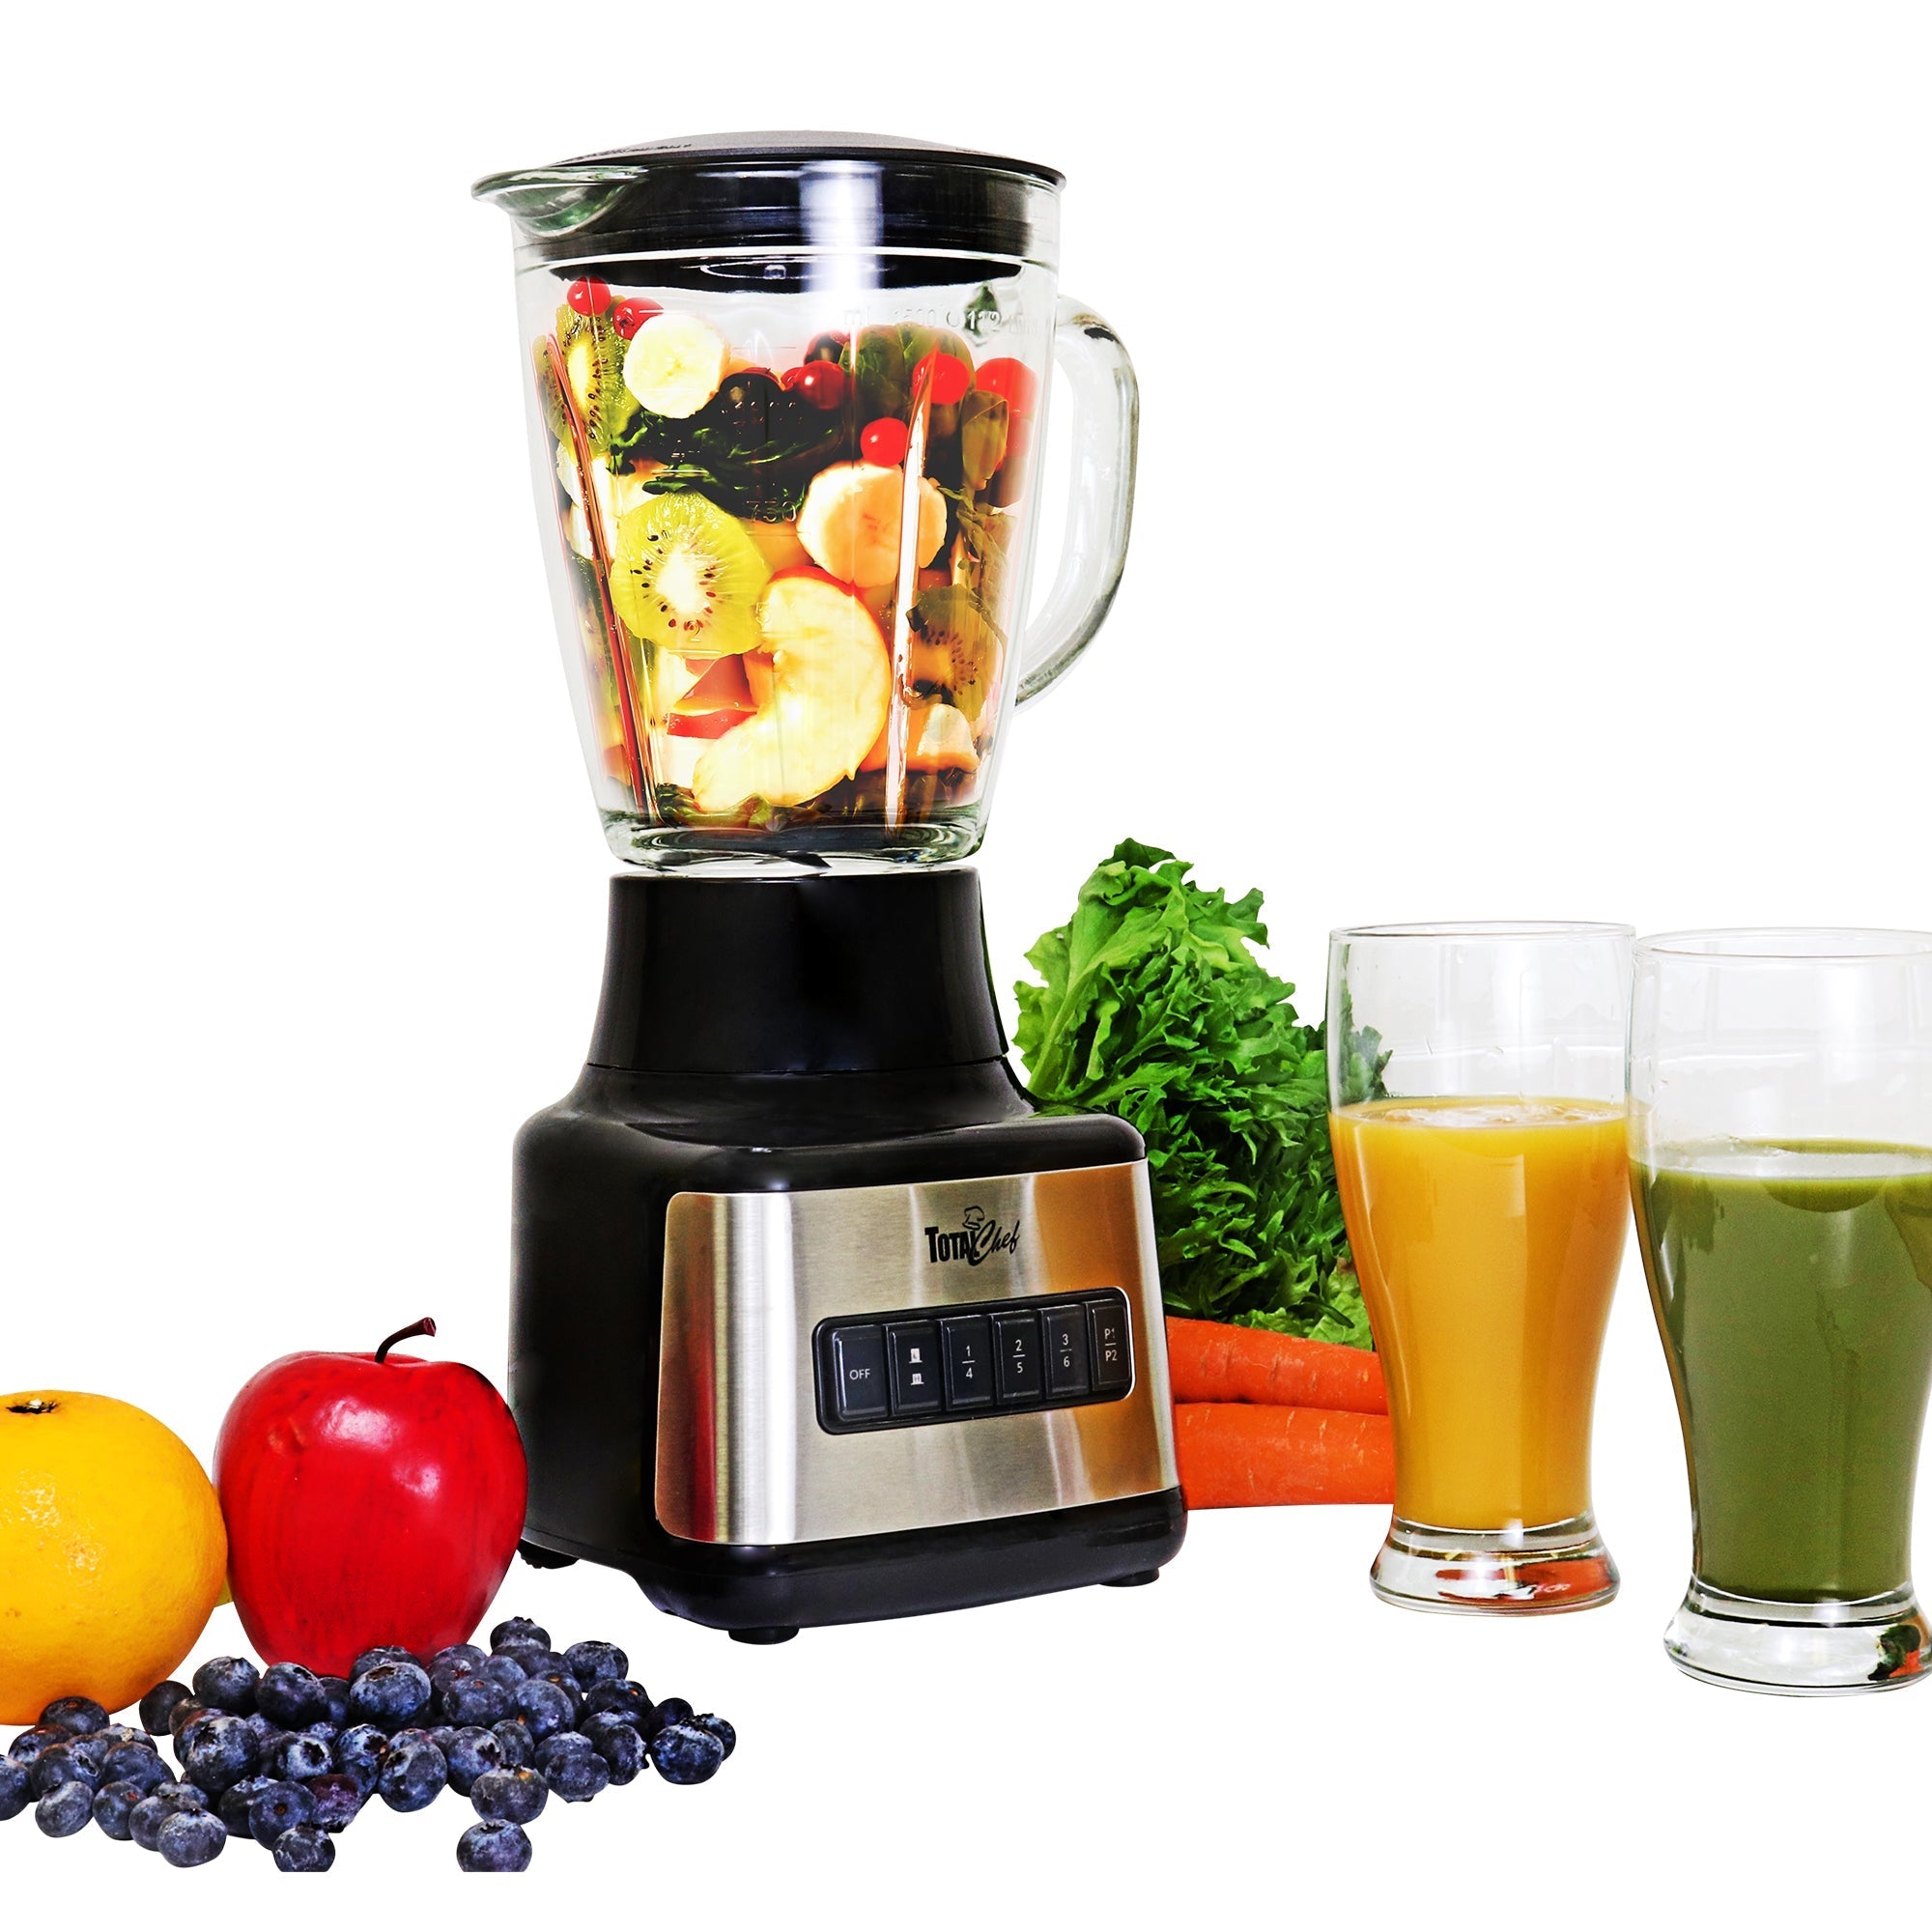 Product shot of blender on white background with fruit in and around blender and glasses of orange and green smoothie beside